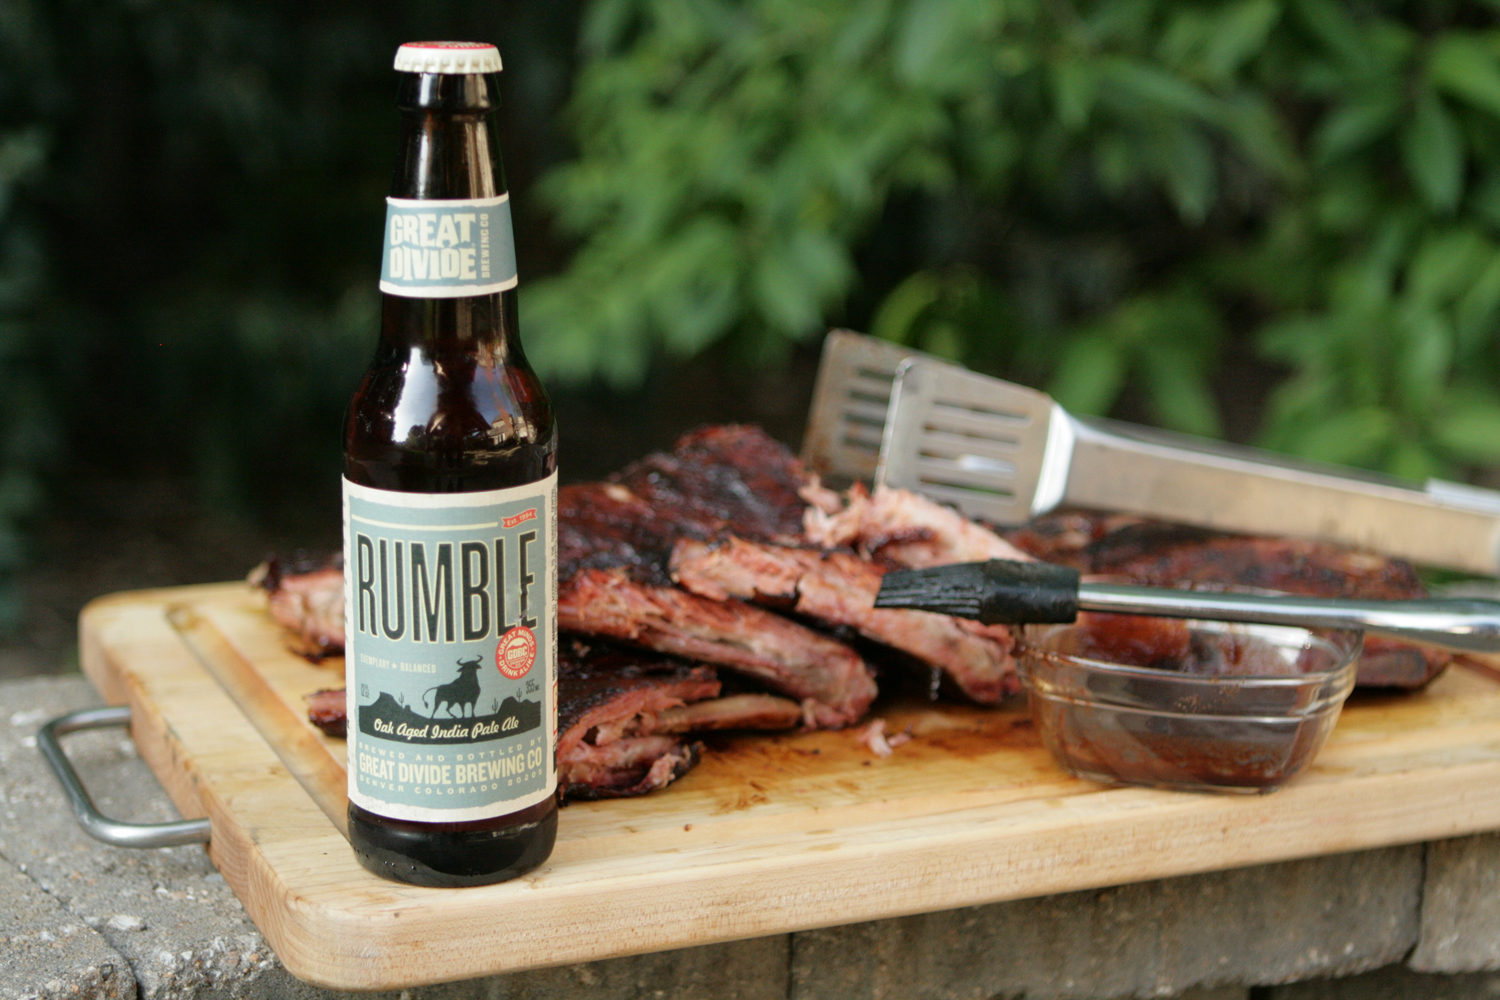 Rumble Summer Colorado IPA Beer is great with bbq.